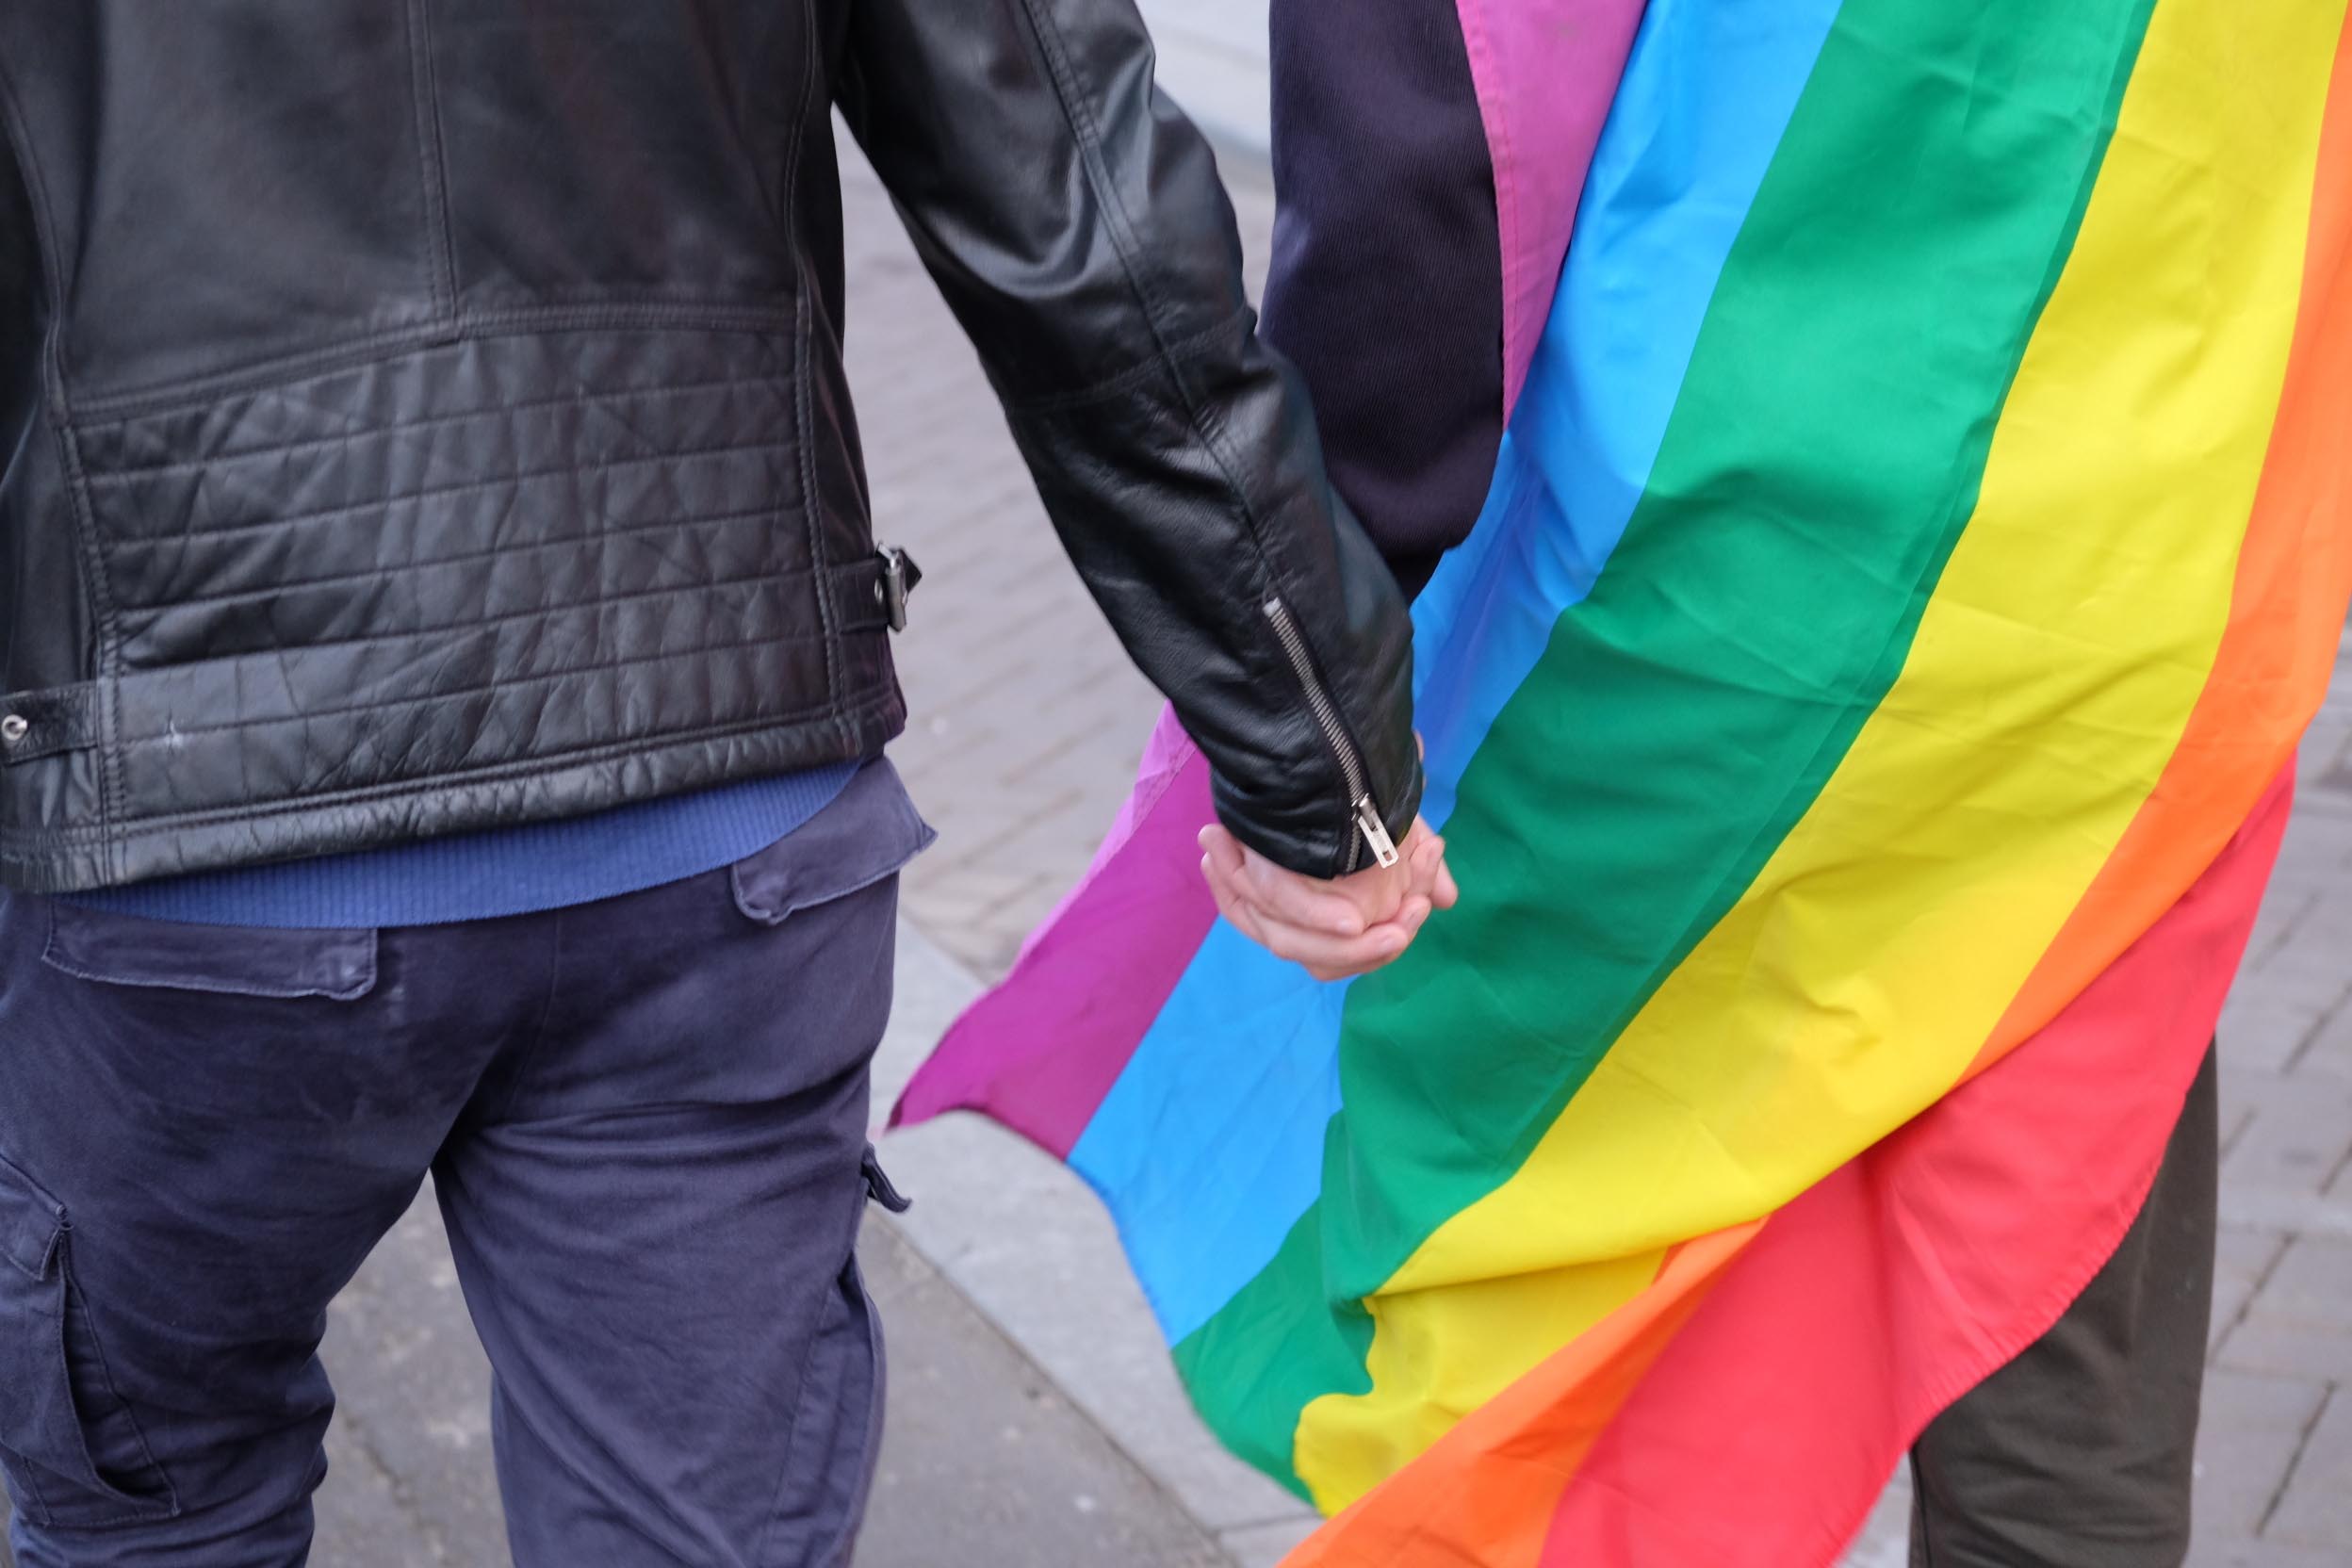 A couple hold hands as protesters march through the Dutch capital Amsterdam to show solidarity for two gay men who were badly beaten over the weekend in the eastern city of Arnhem, on Wednesday, April 5, 2017. Photo: AP